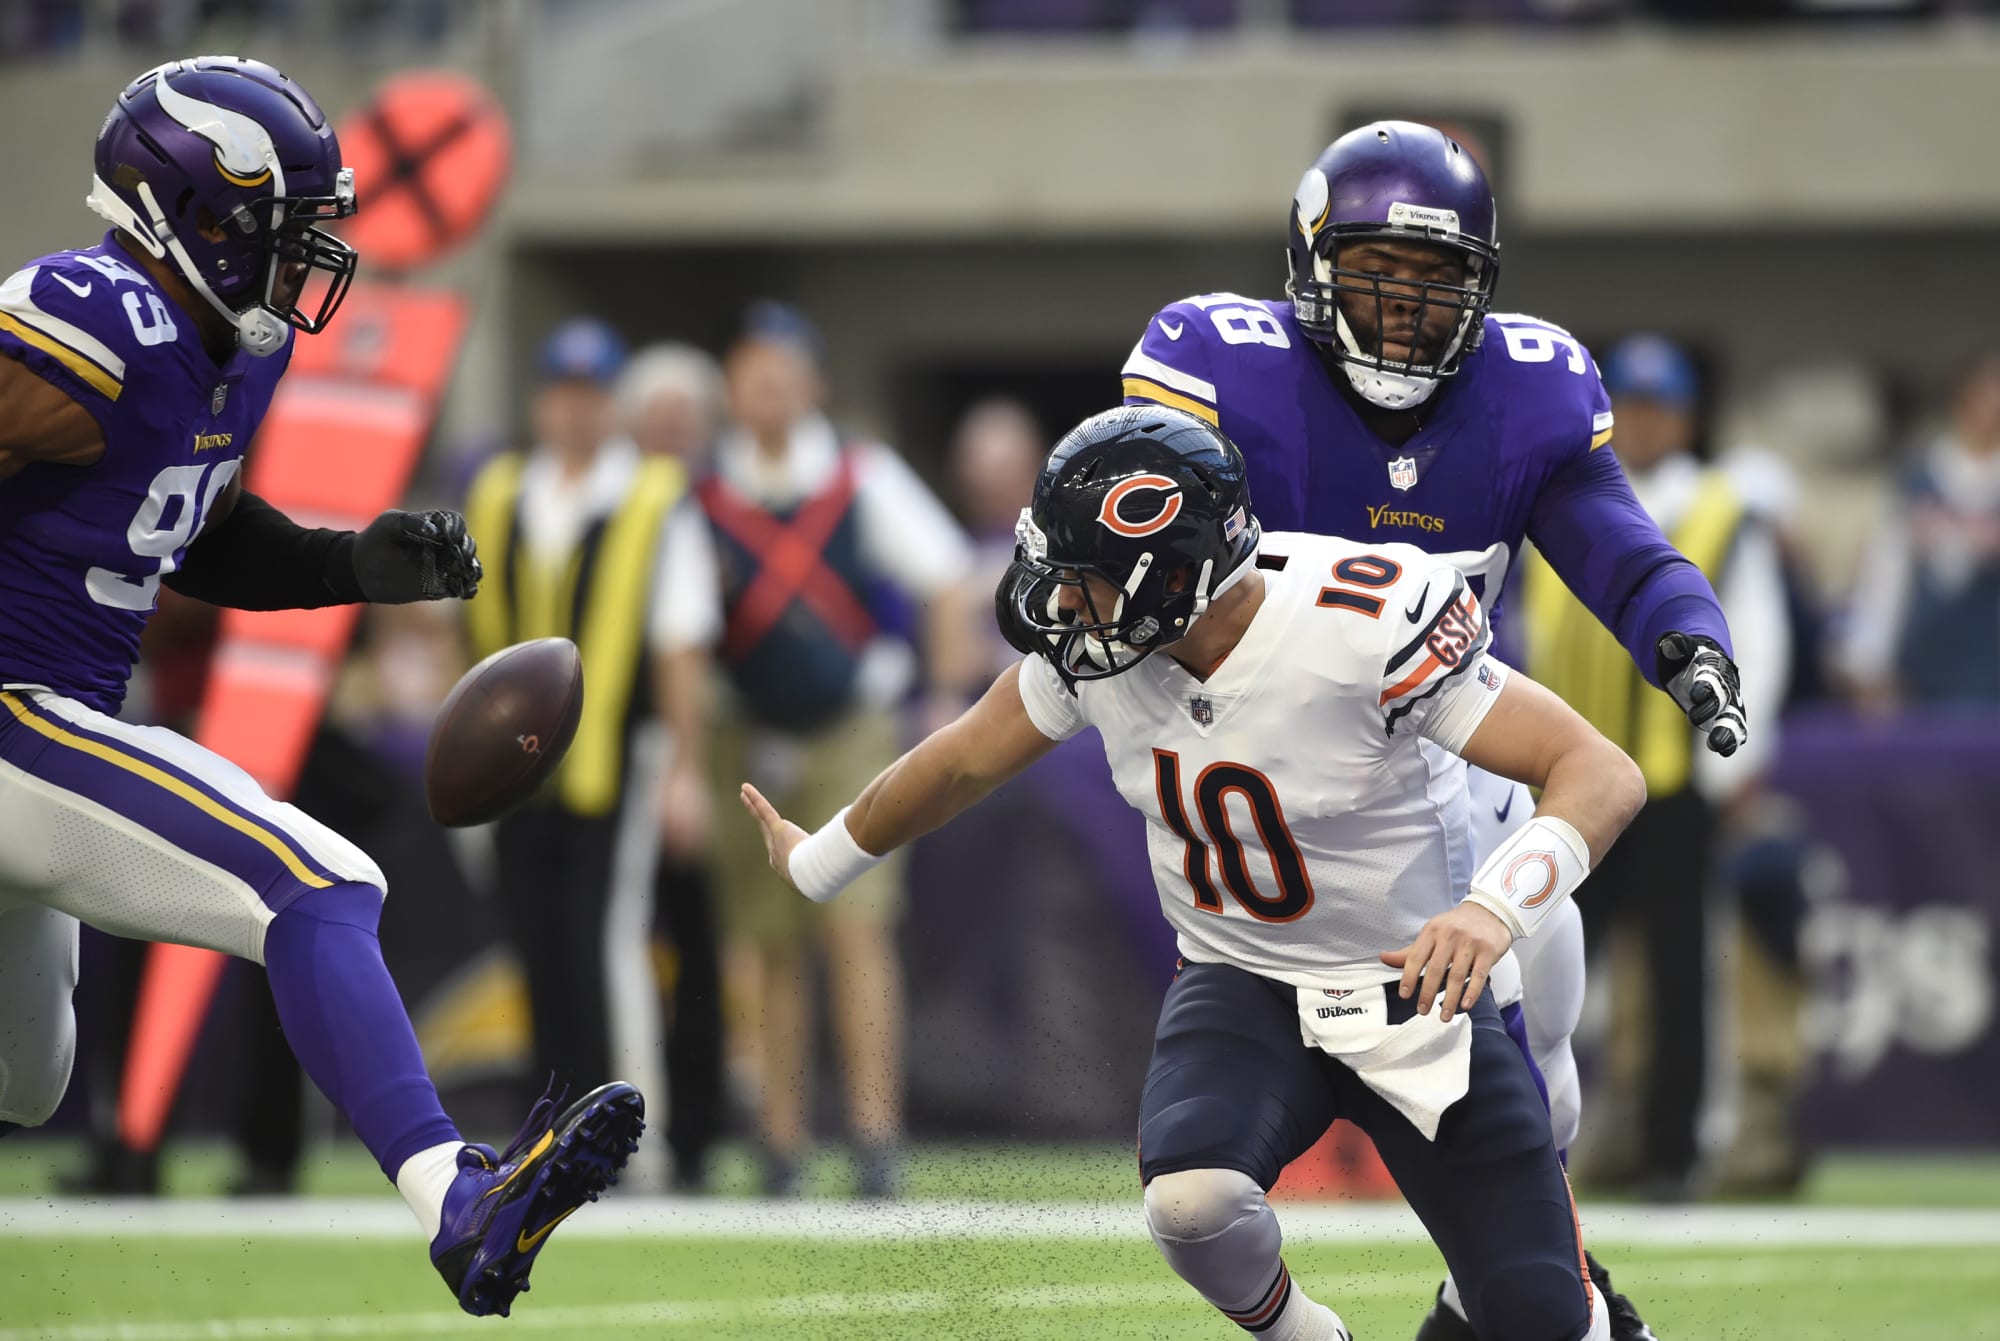 Vikings vs Bears in Week 11 How to watch, time, channel, refs, and more!